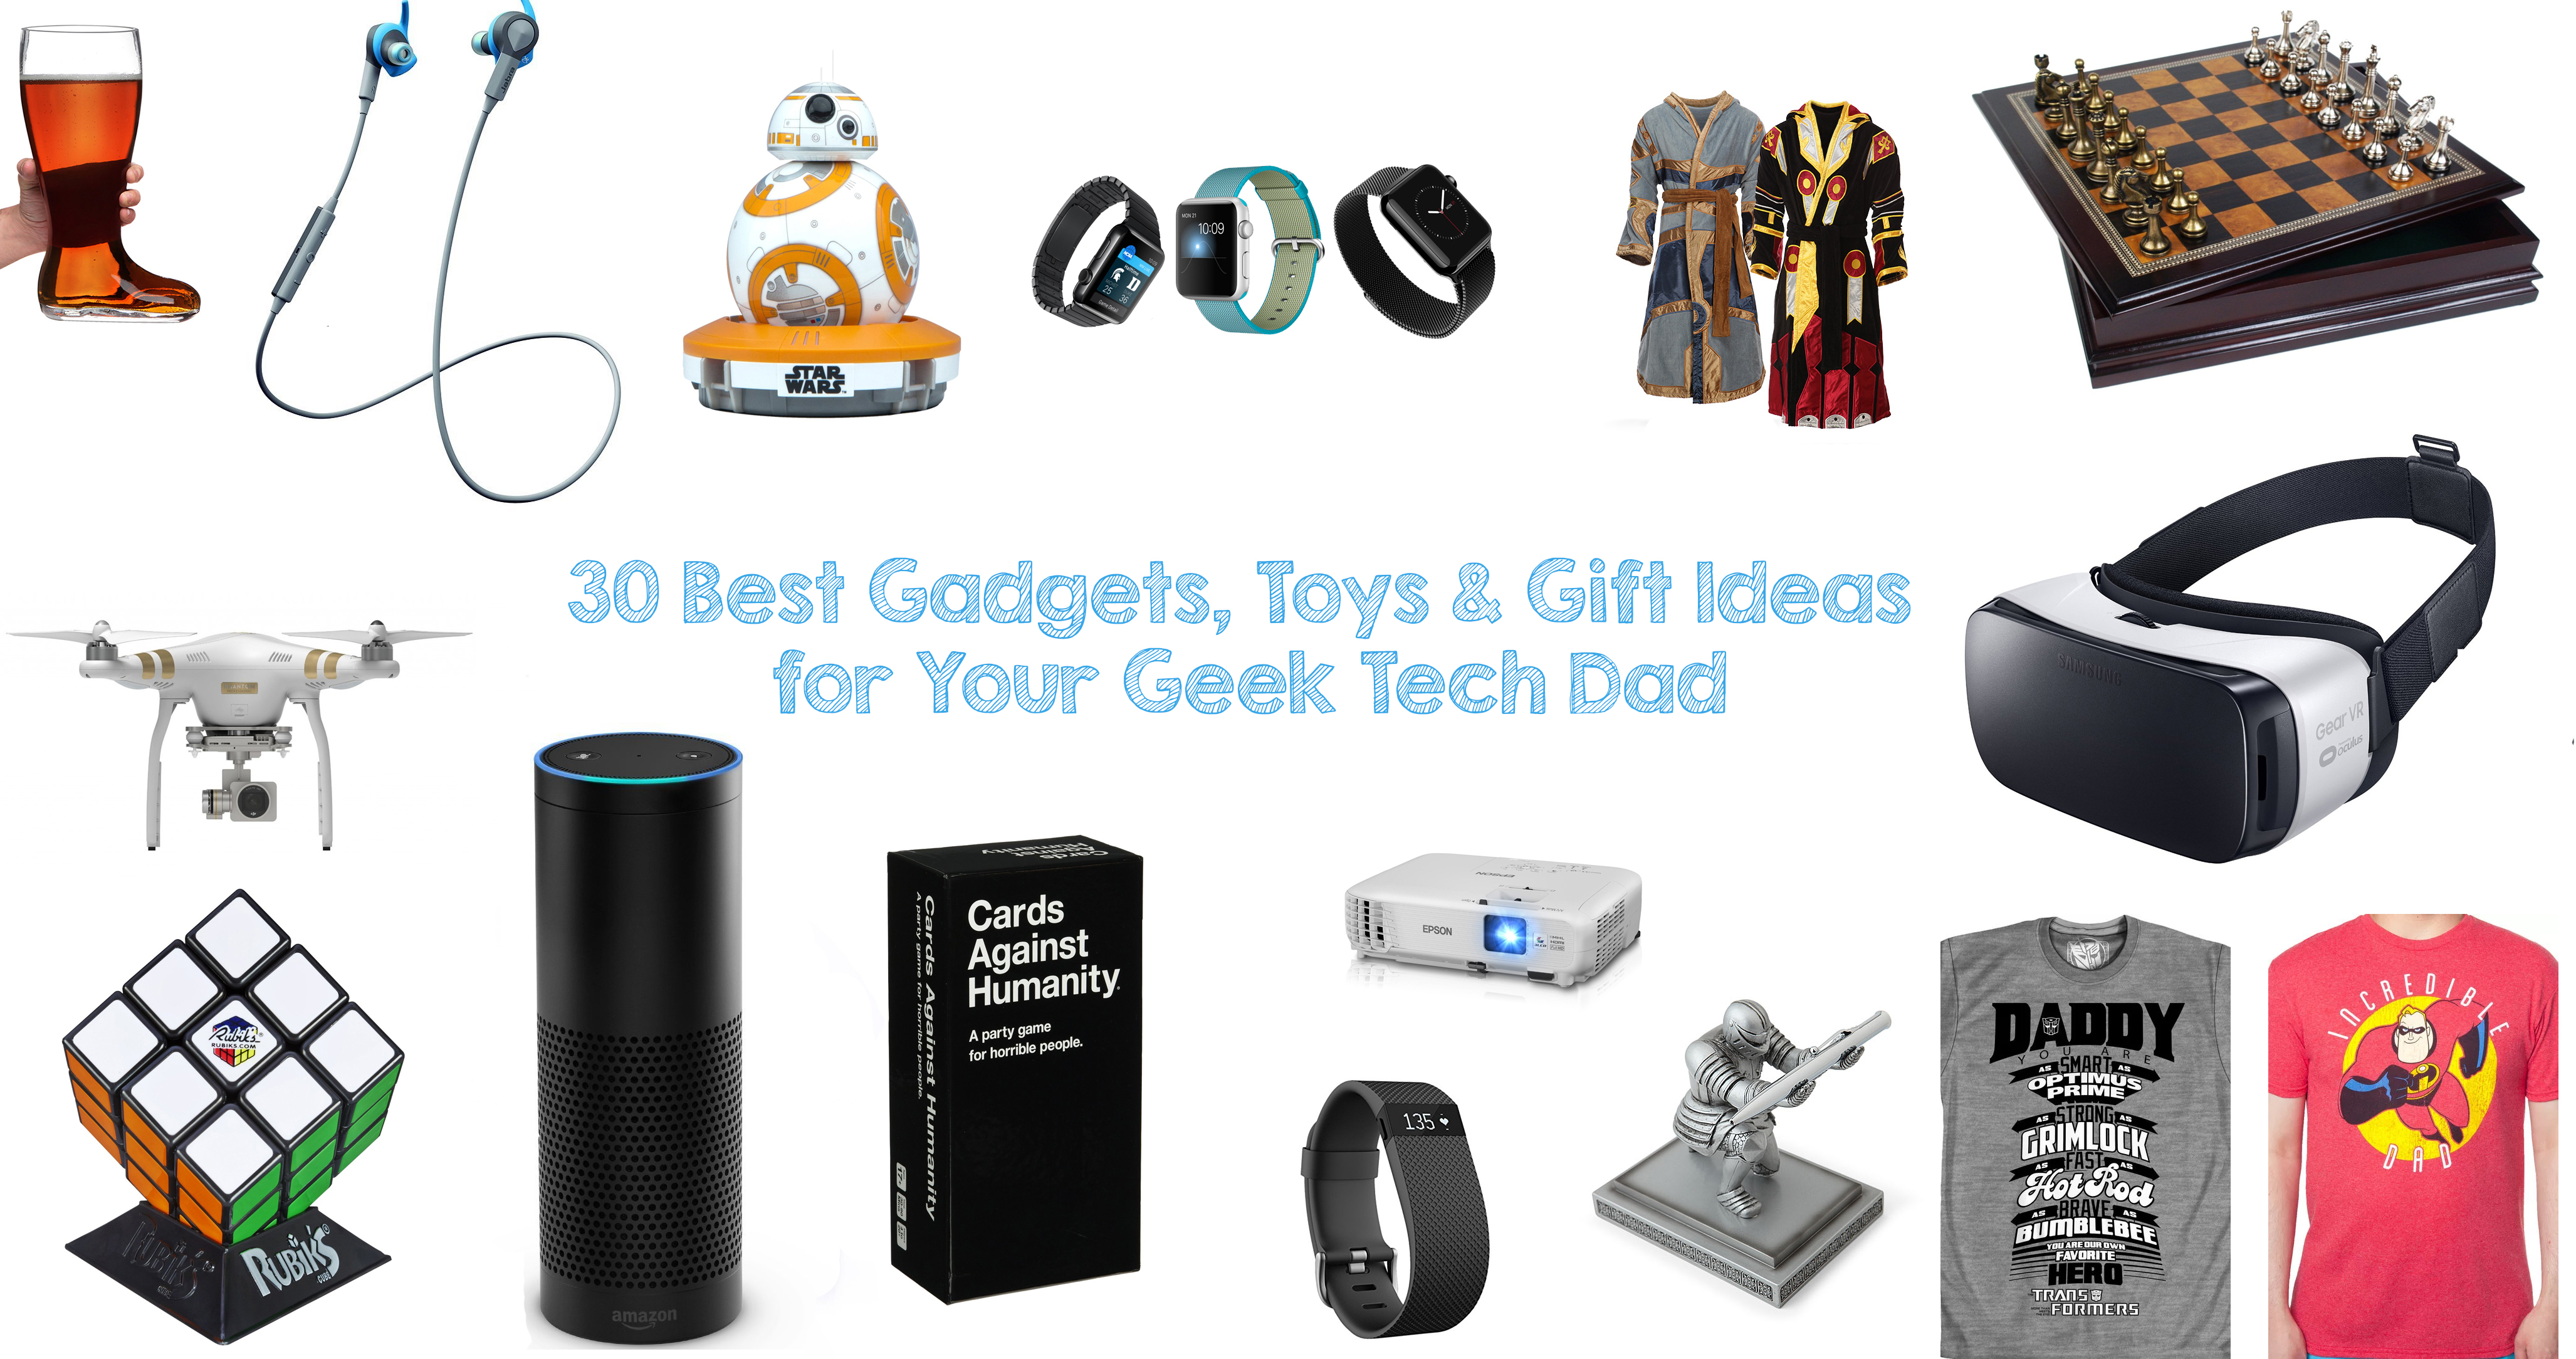 30 Best Gadgets, Toys & Gift Ideas for Your Geek Tech Dad